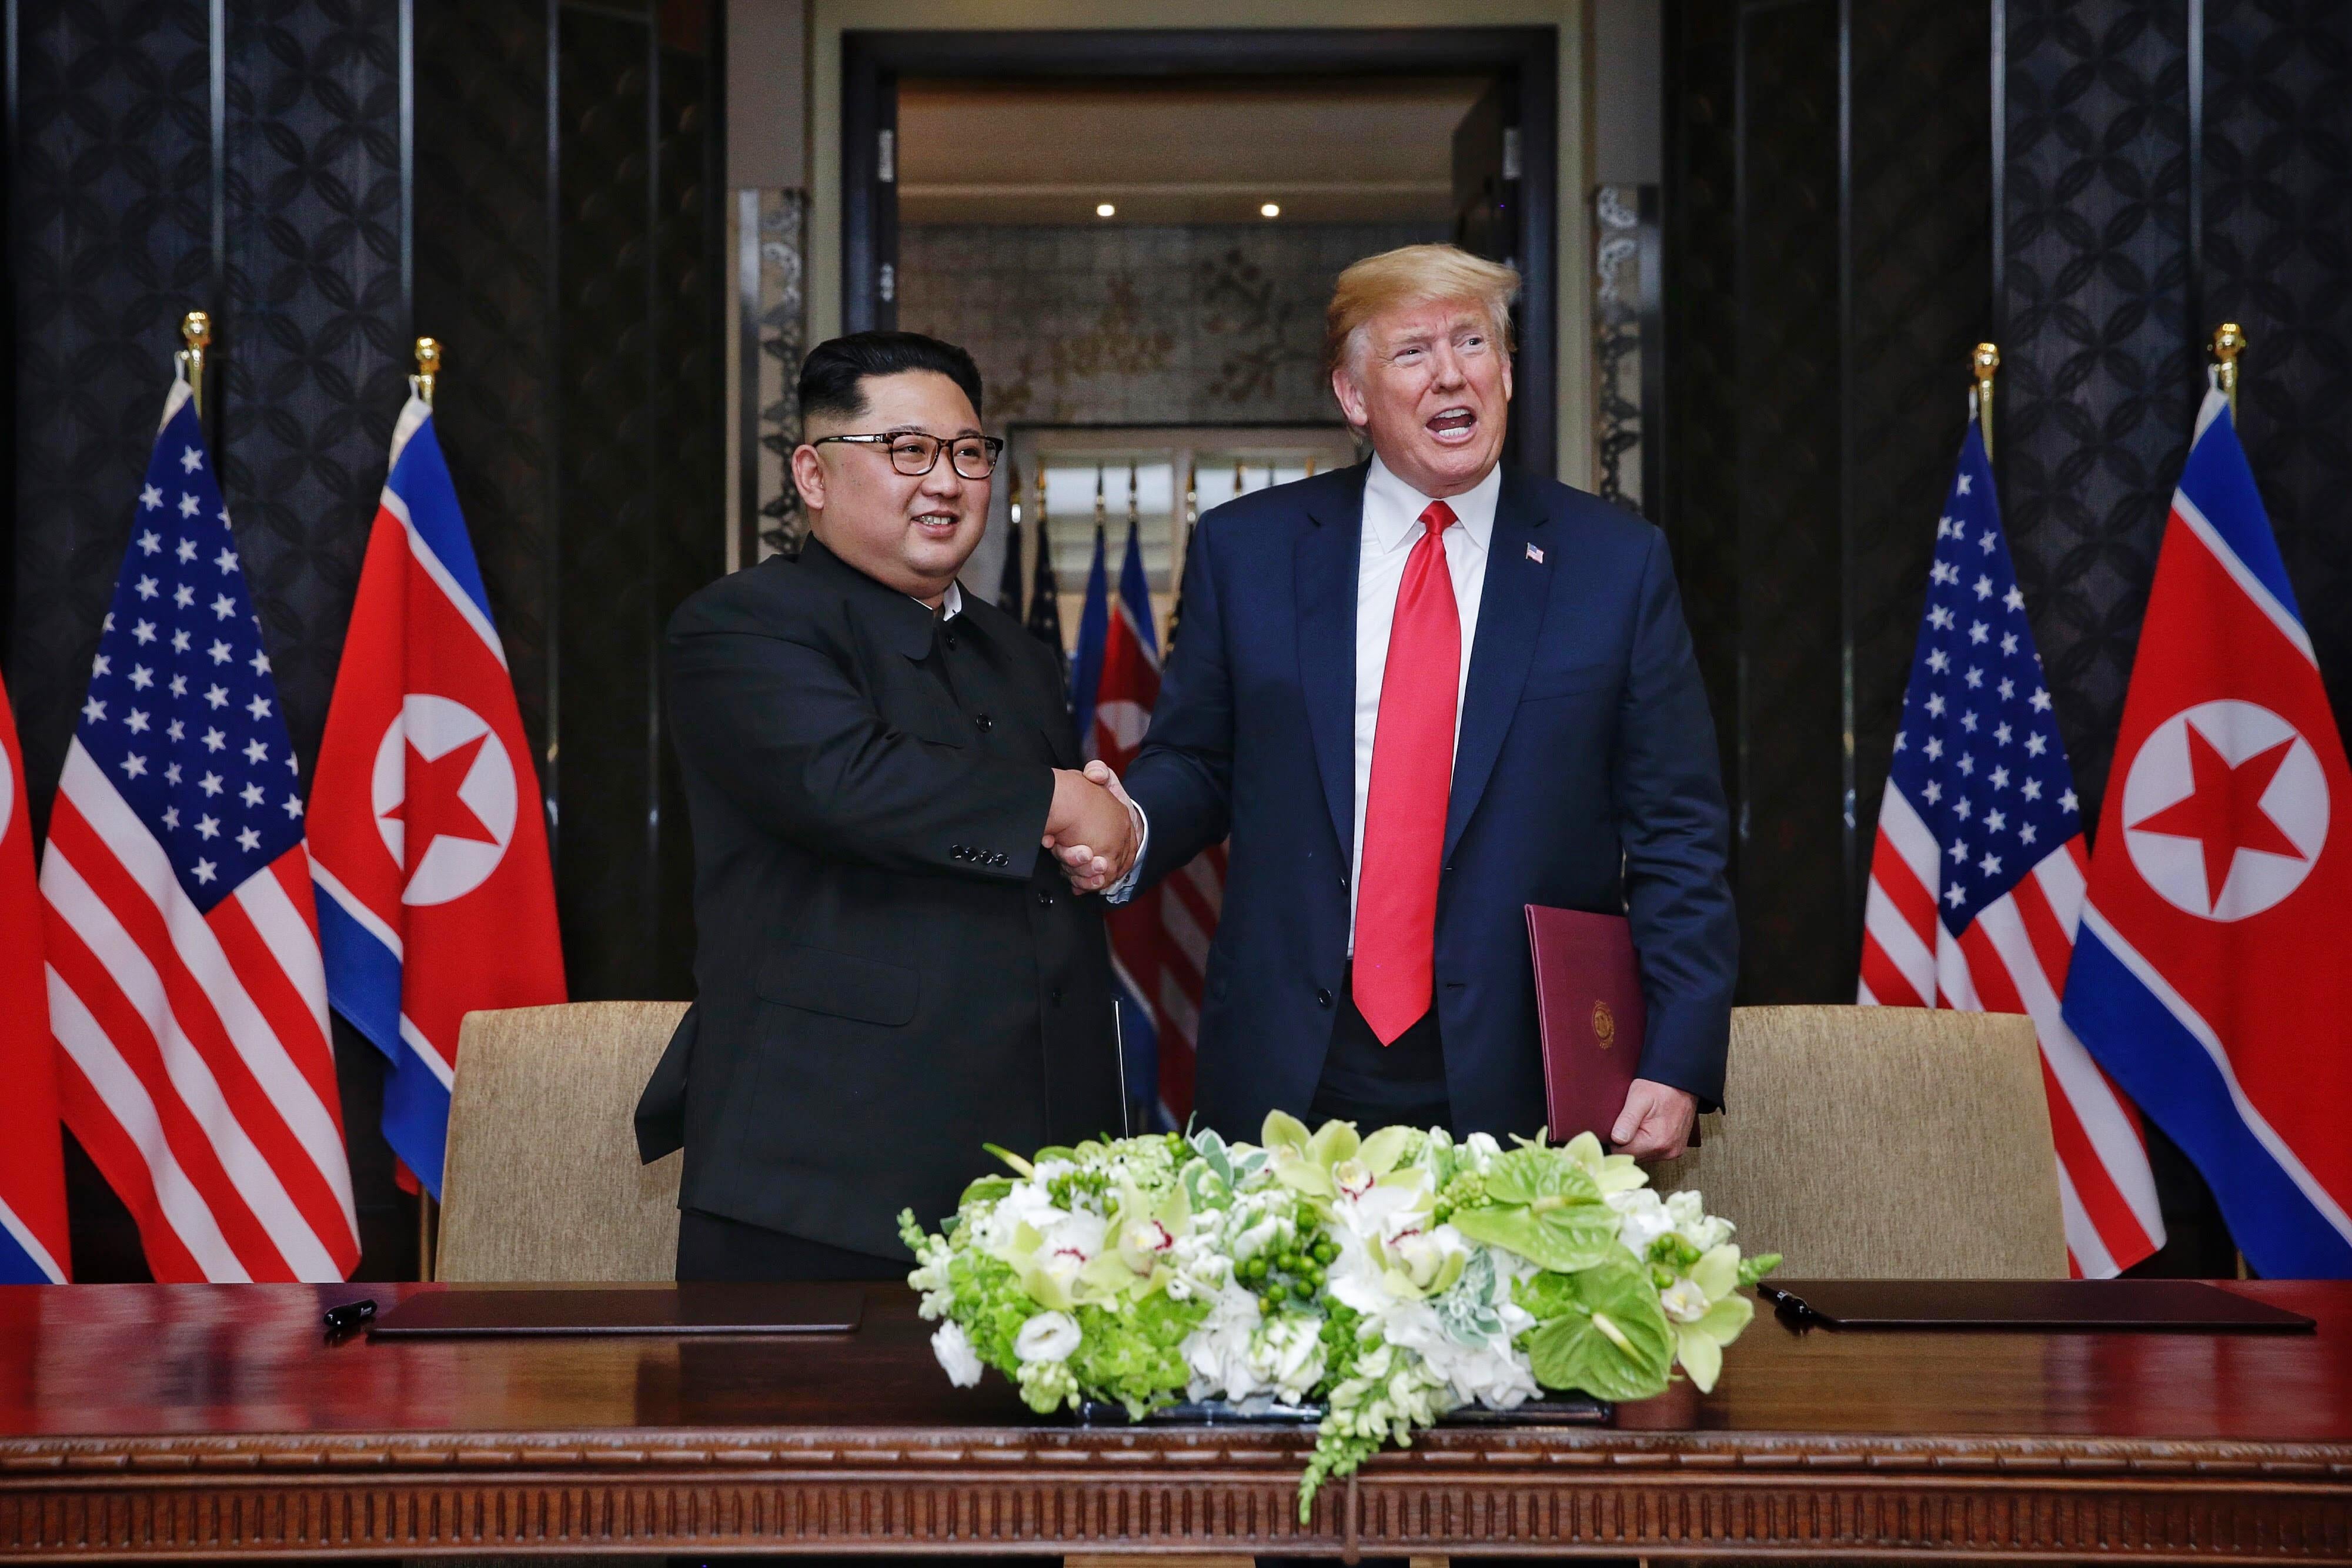 Kim Jong-un and President Trump shaking hands amid North Korean and American flags